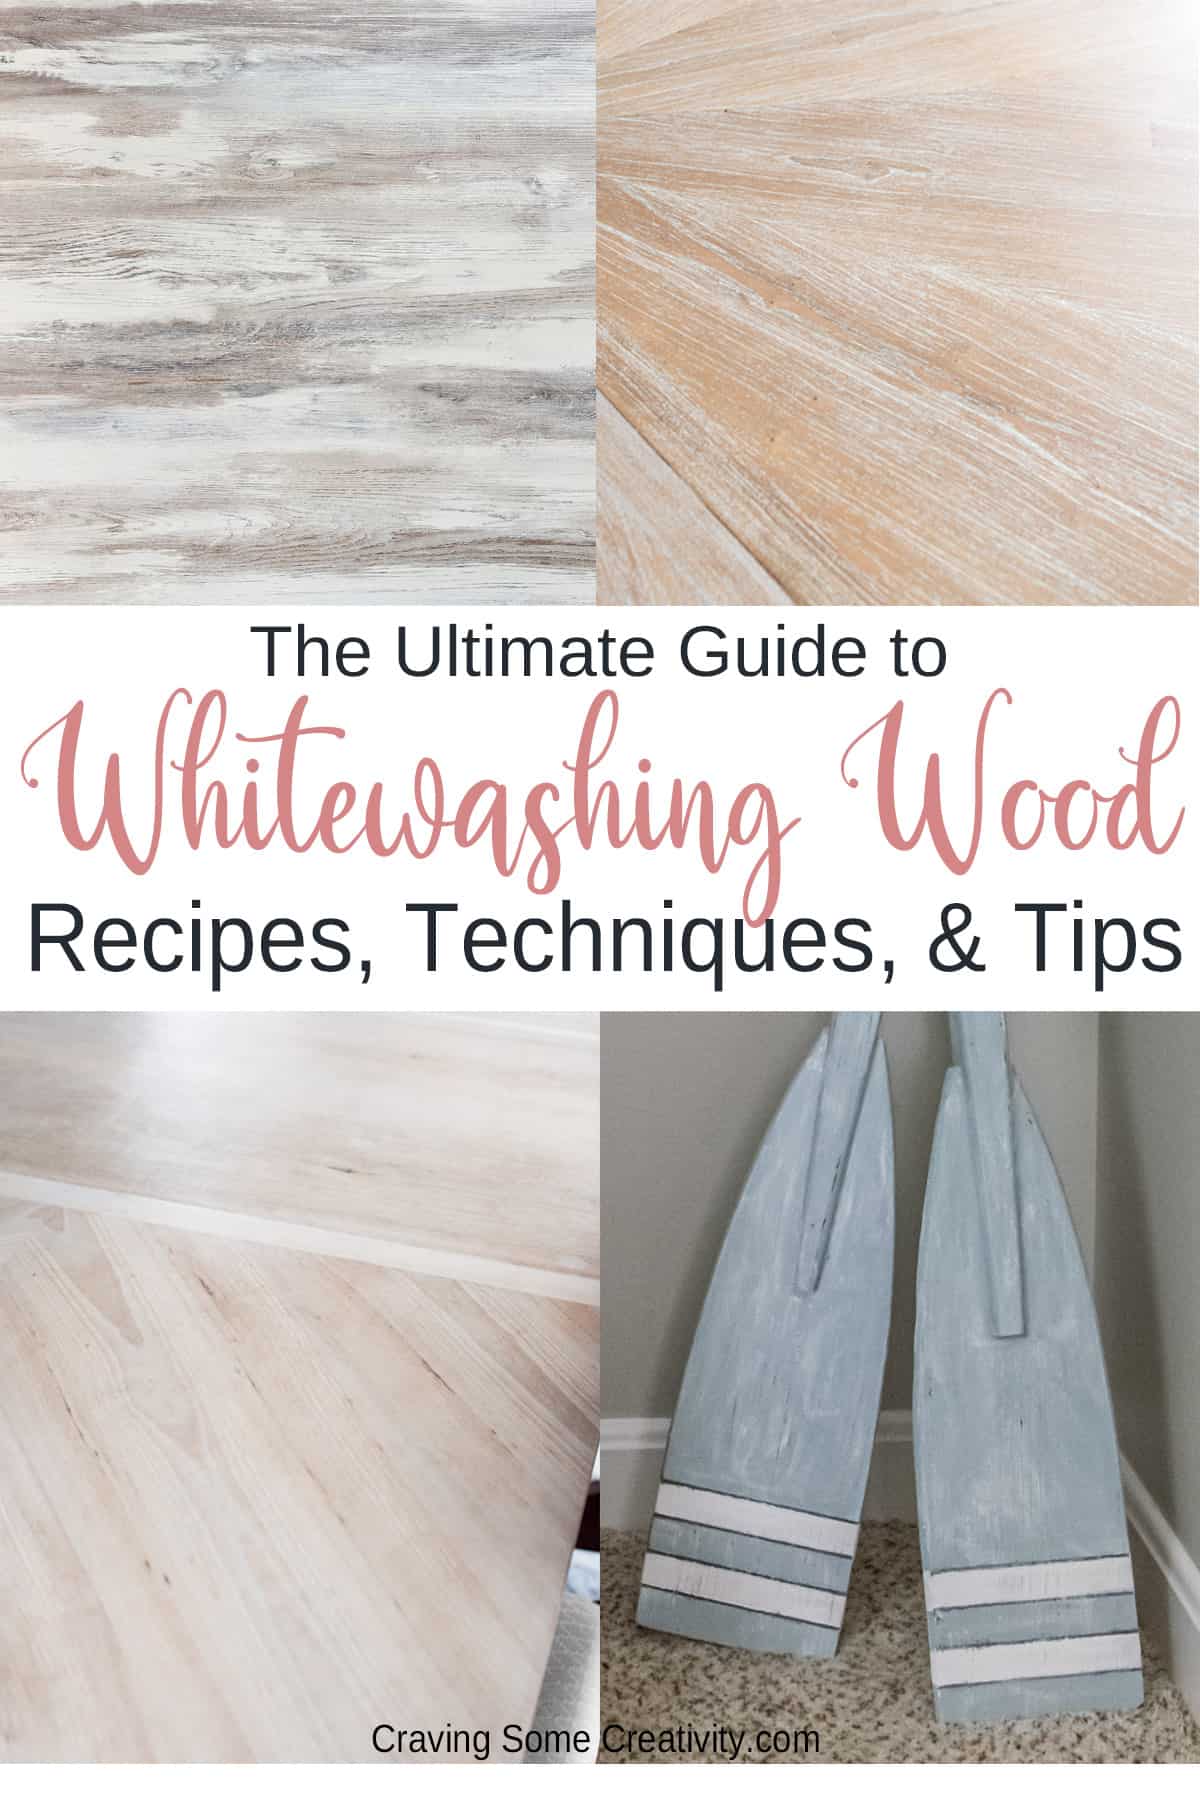 Collage of whitewashing wood techniques with text overlay reading recipes, techniques, and tips.